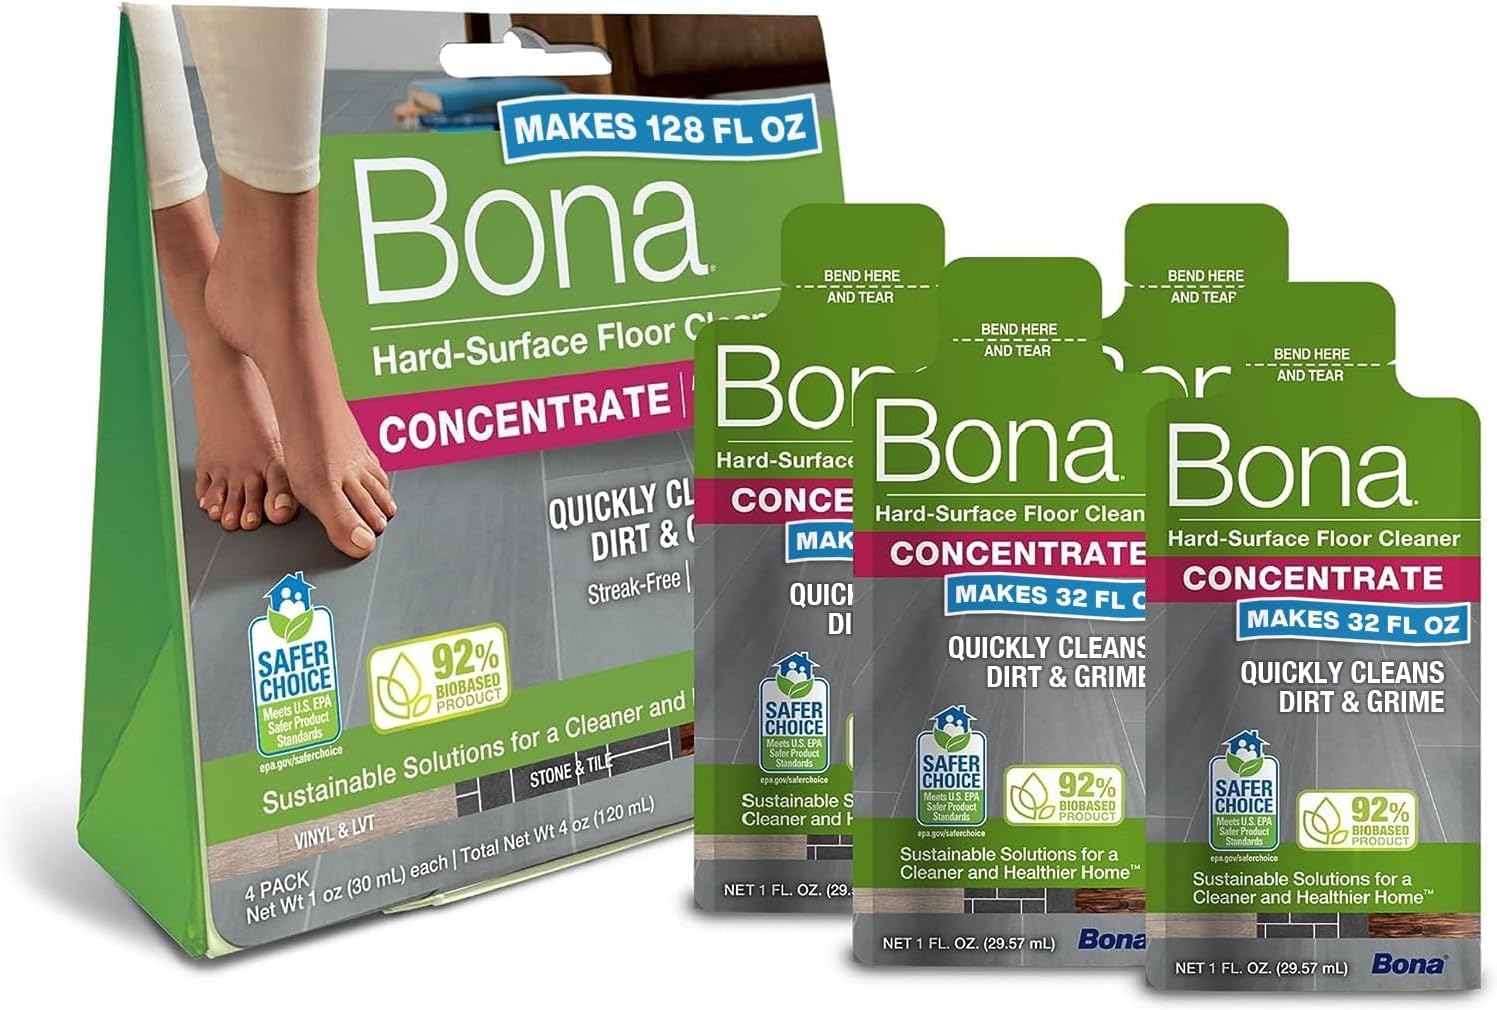 Bona Multi-Surface Floor Cleaner Concentrate, Unscented, 1 fl oz, Pack of 4 (Makes 128 fl oz) Spray Mop and Spray Bottle Refill - For Use of Stone, Tile, Laminate, and Vinyl Floors